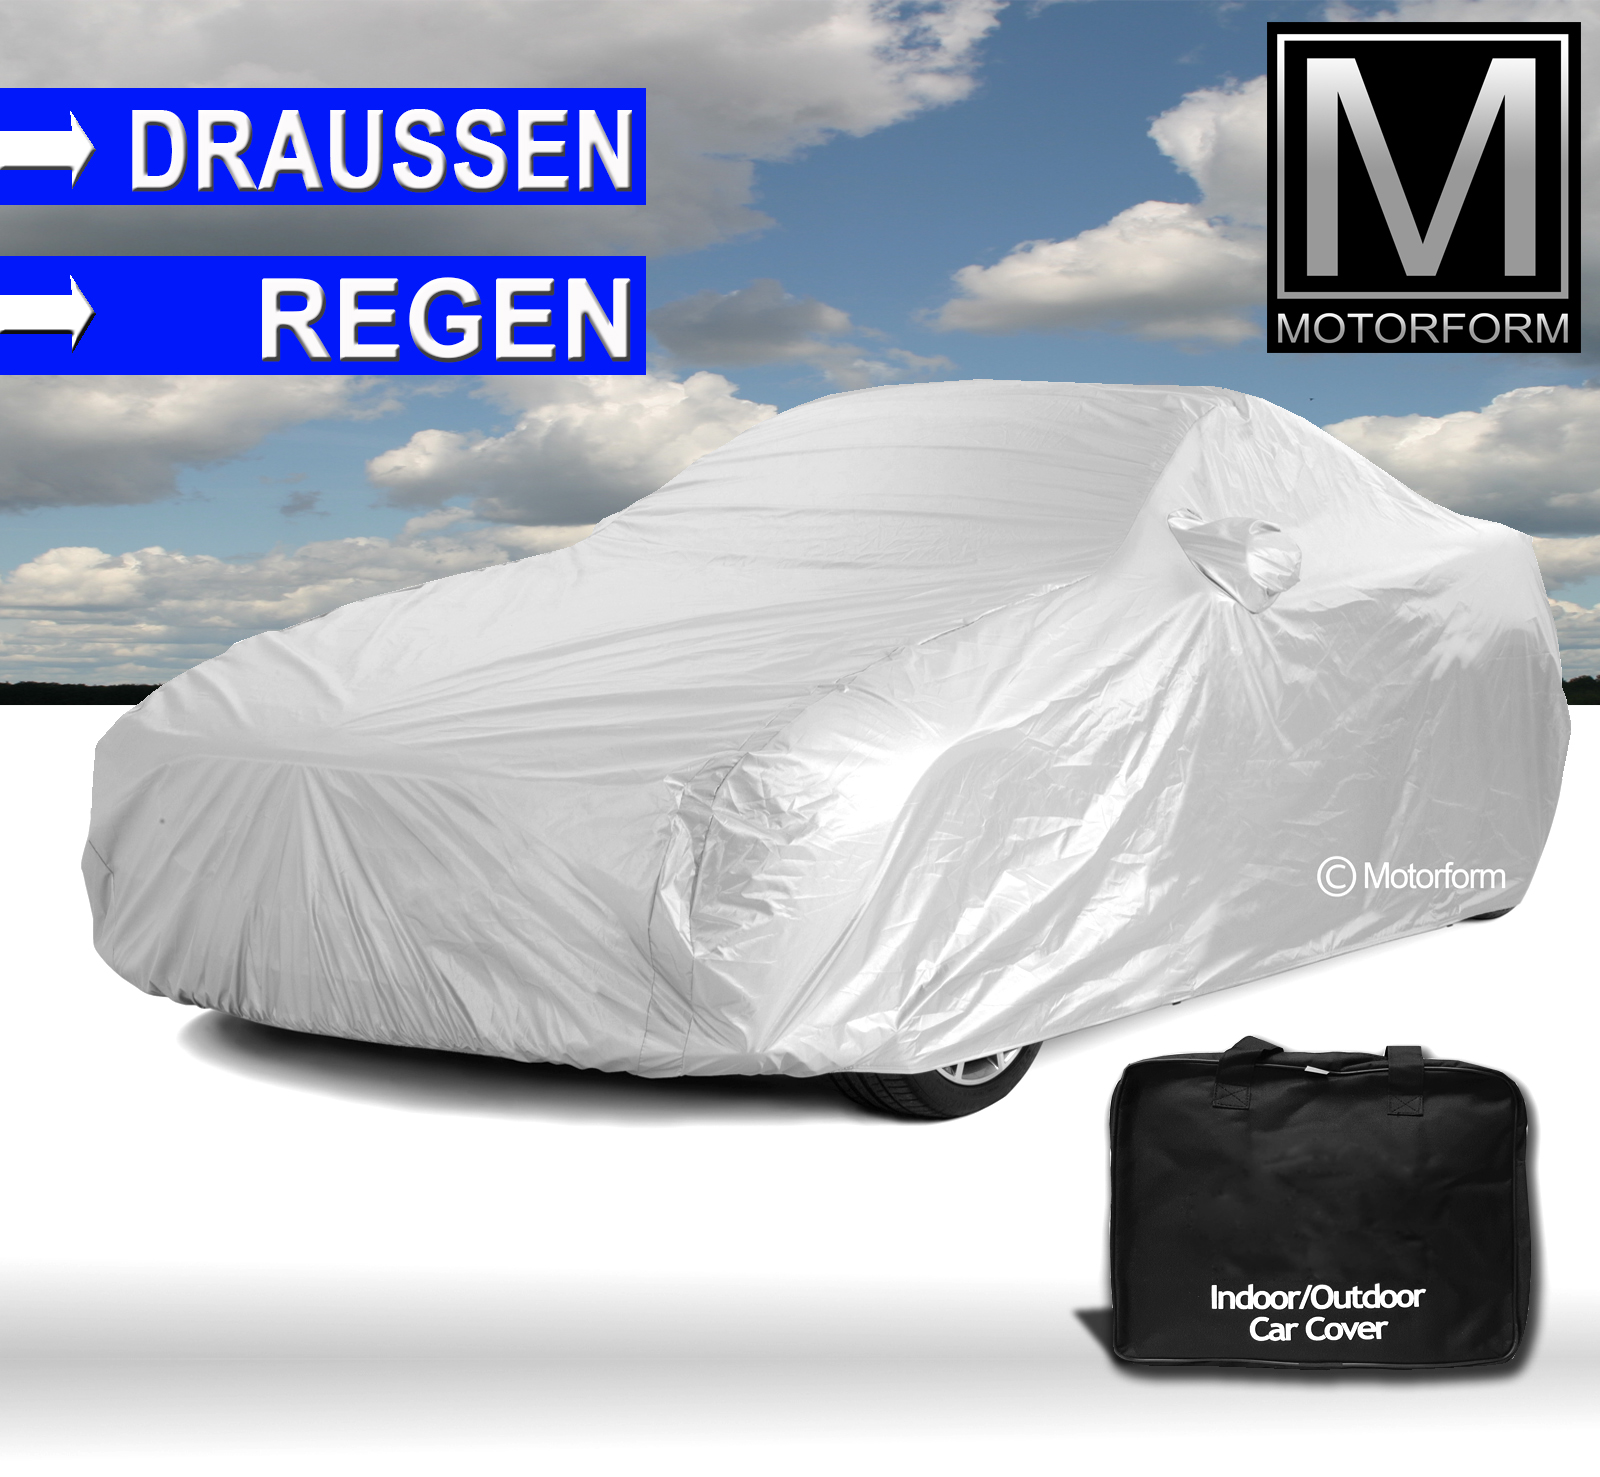 Voyager Outdoor Car Cover for BMW 2 series Coupe F22 (2013-20)